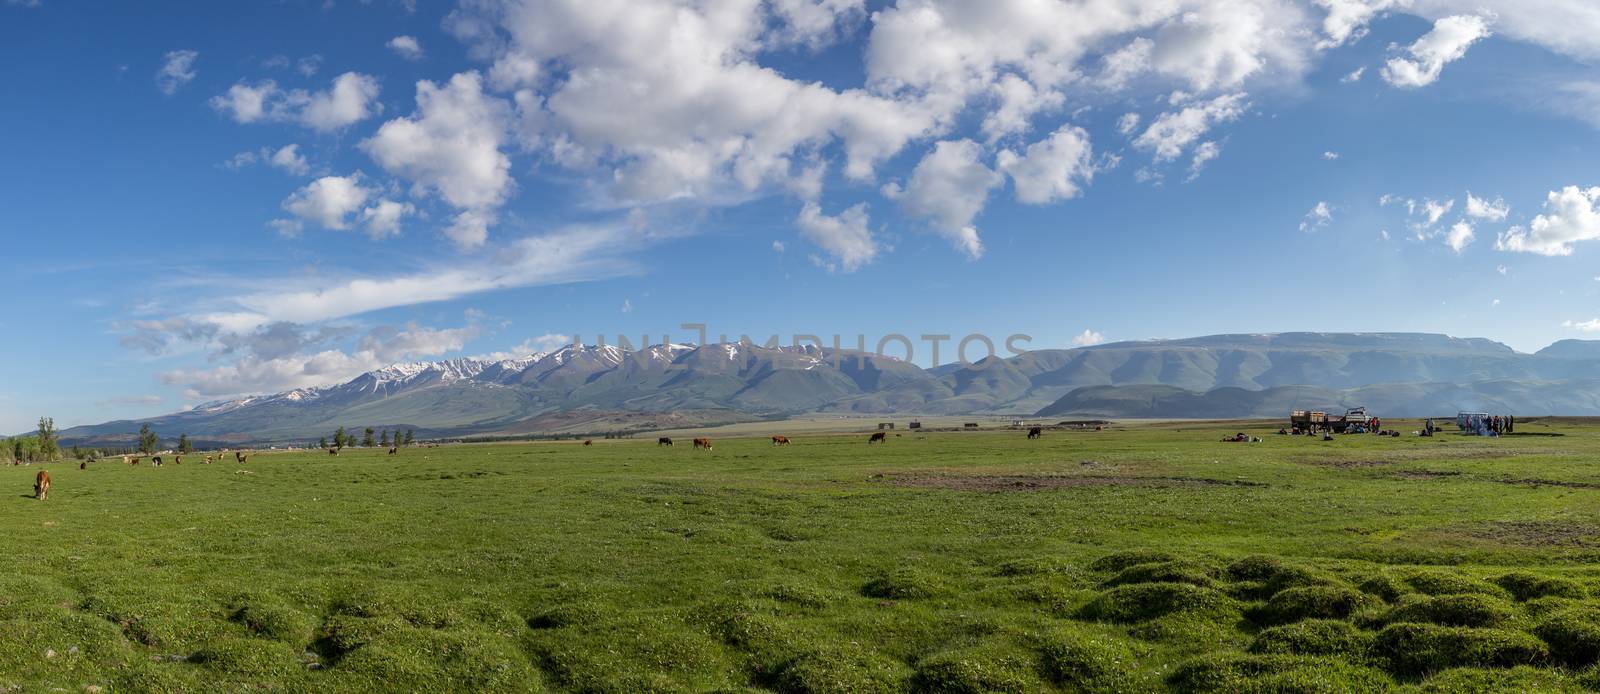 The idyllic landscape: cow grazing and tourists pack their tent  by dpetrakov